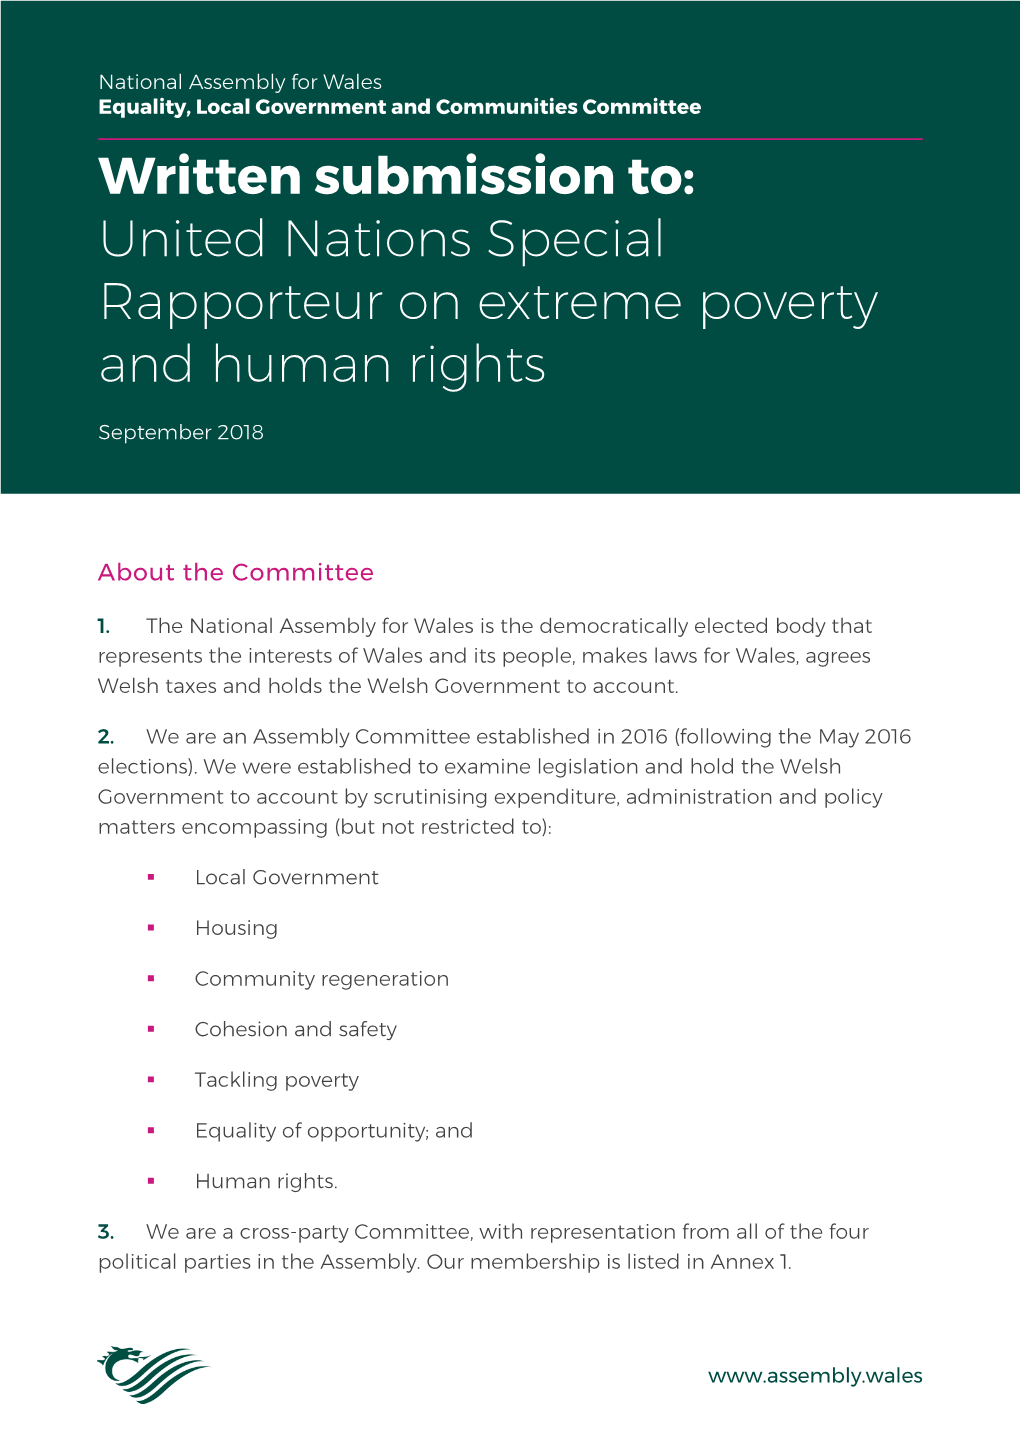 Written Submission To: United Nations Special Rapporteur on Extreme Poverty and Human Rights